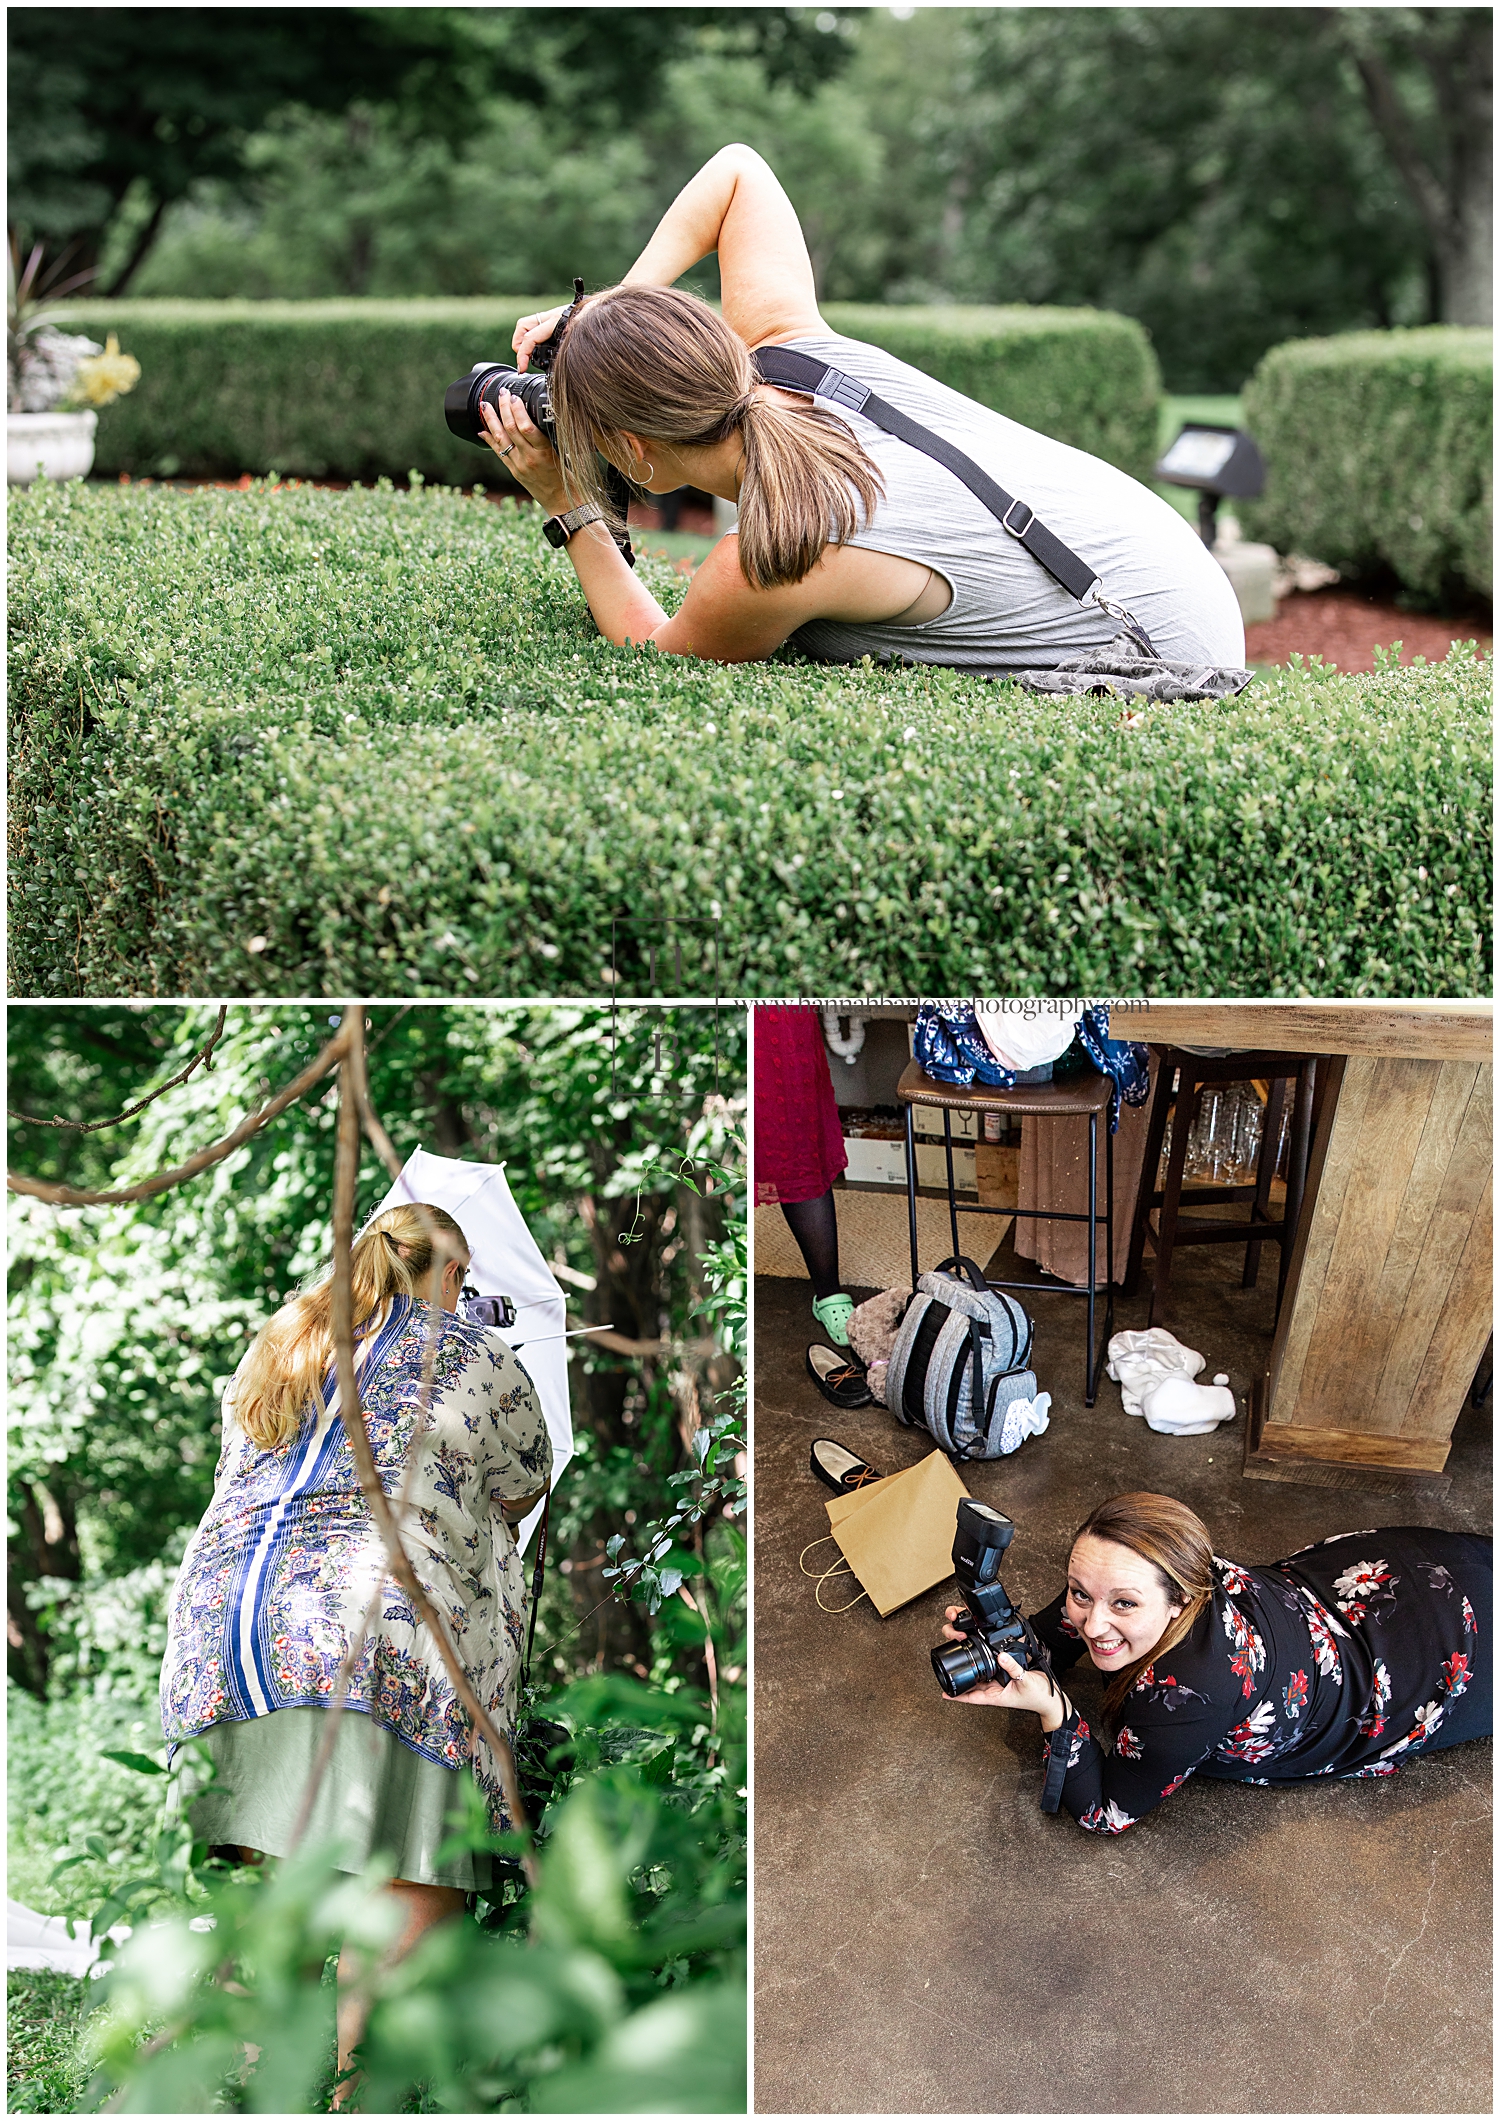 Wedding photographers lay on ground and in bushes to take photos